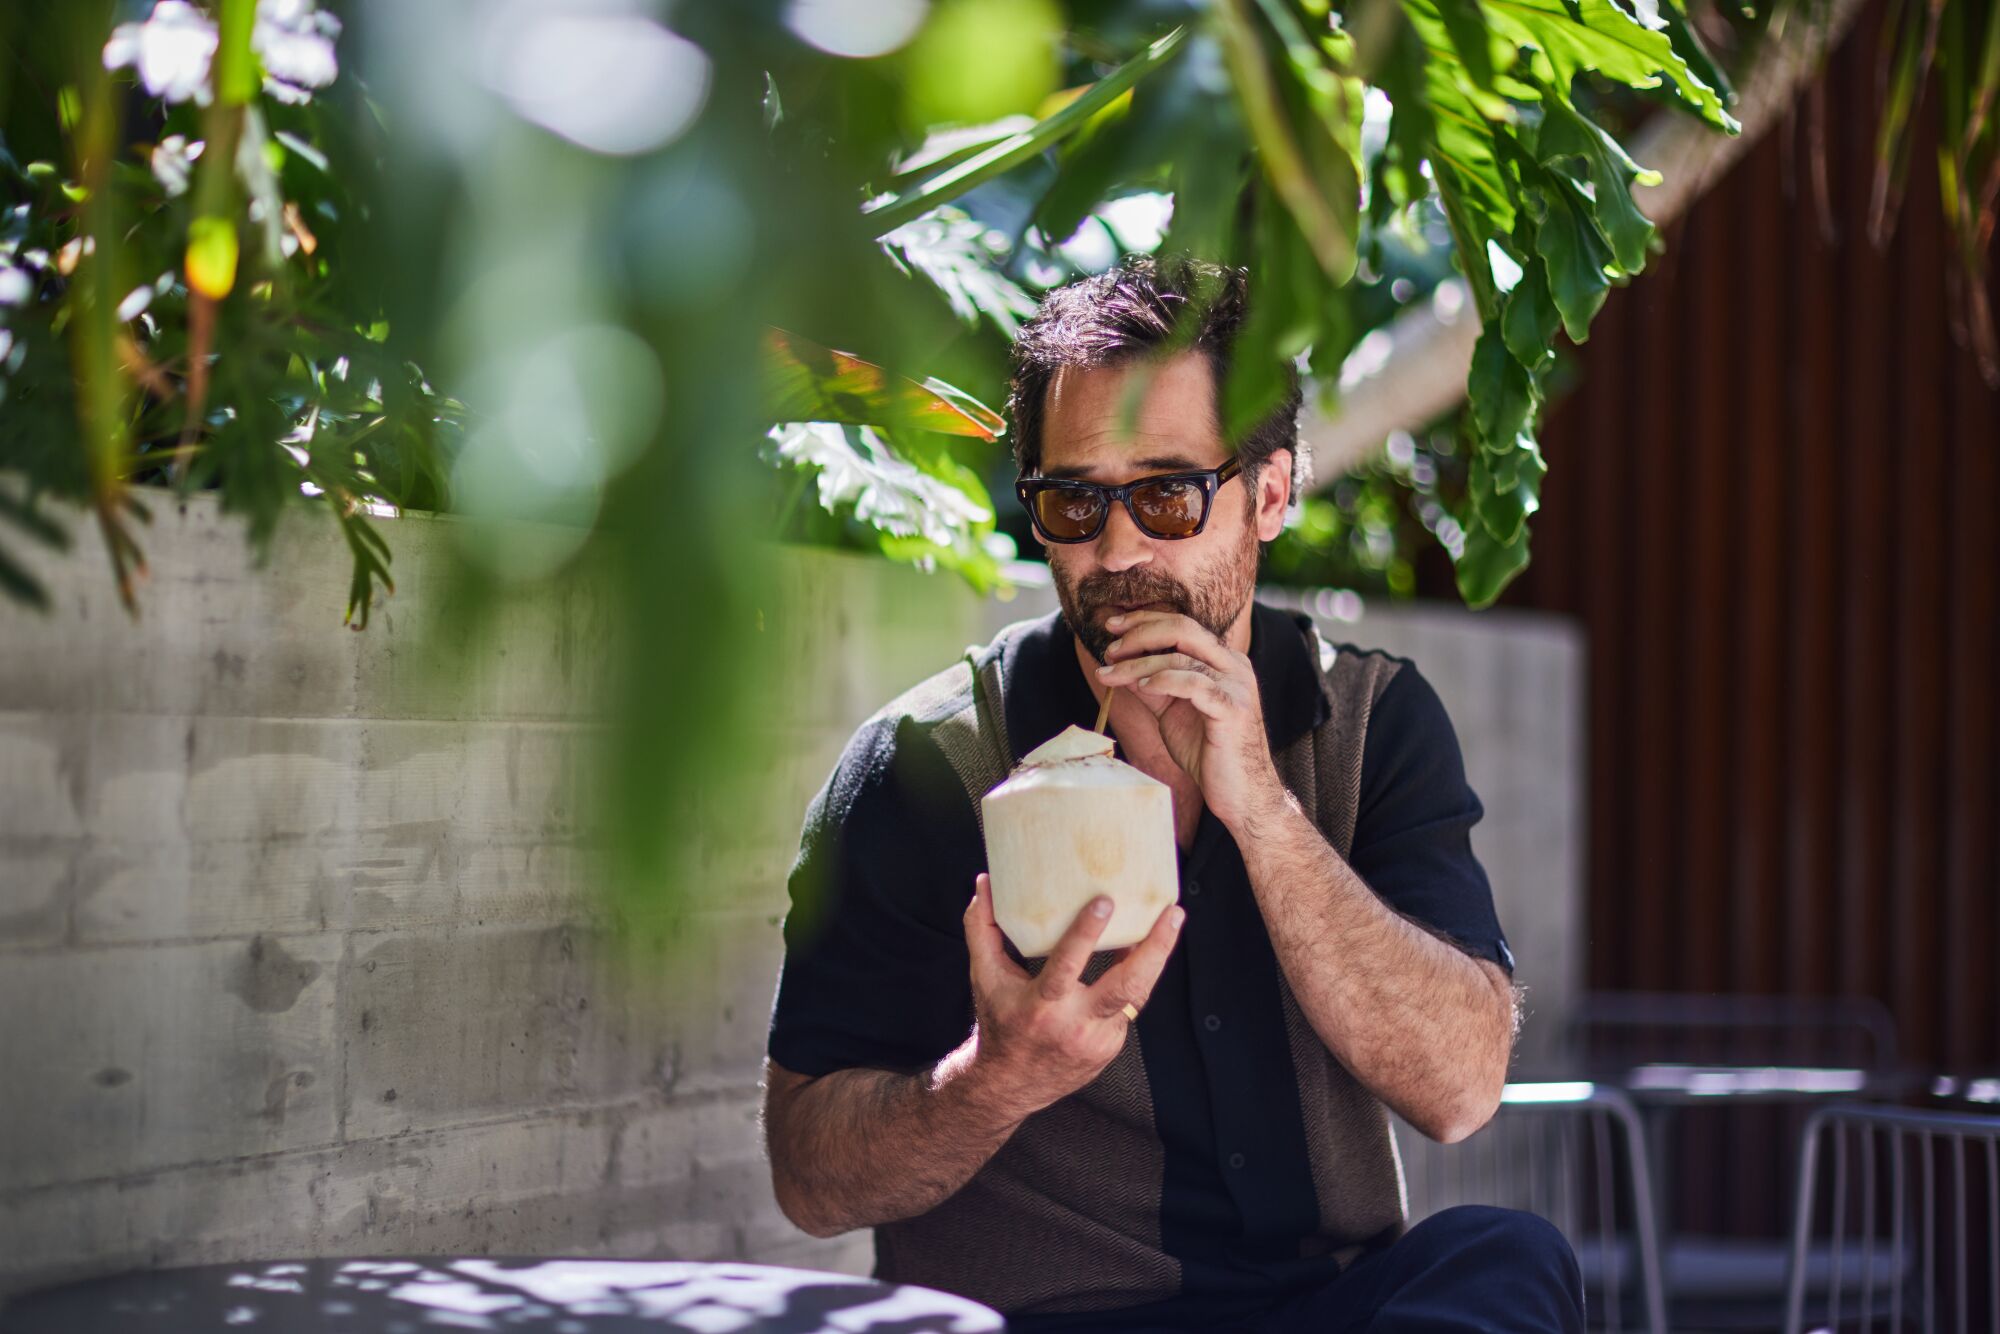 Manuel Garcia-Rulfo, wearing sunglasses, sips from a coconut with a straw.